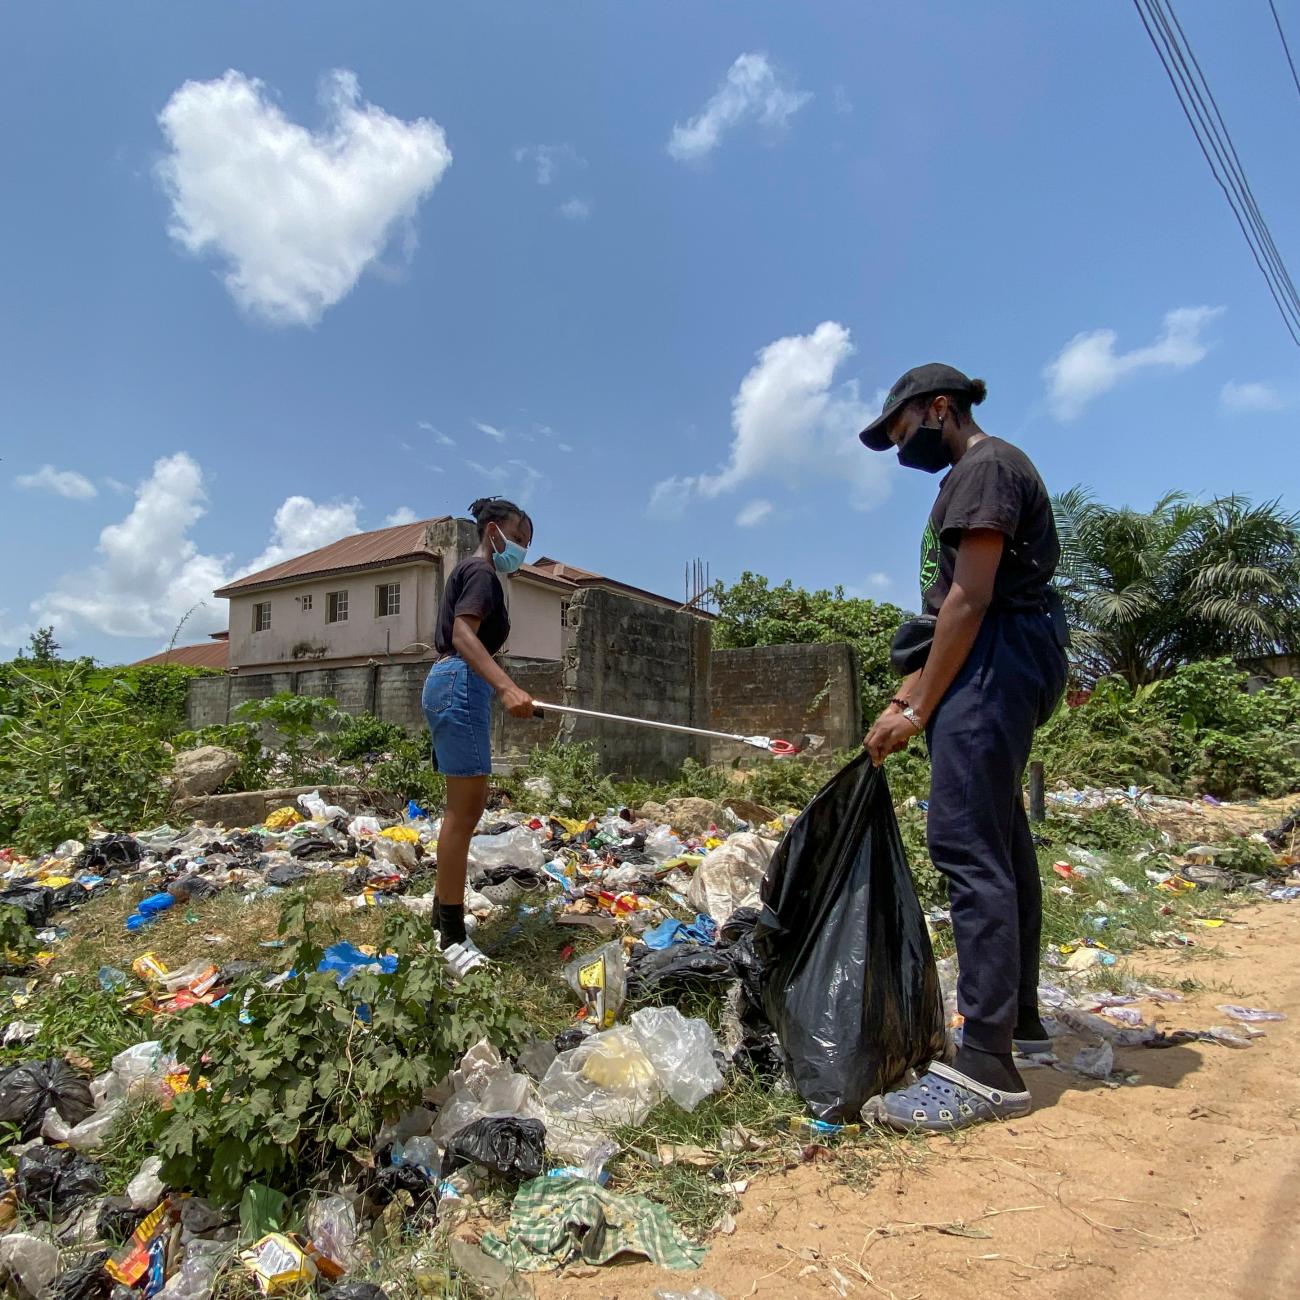 Esohe Ozigbo, a 15-year-old climate change activist, is seen during one of her campaign picking up refuse disposed carelessly in Lagos, Nigeria April 16, 2021. Picture taken April 16, 2021